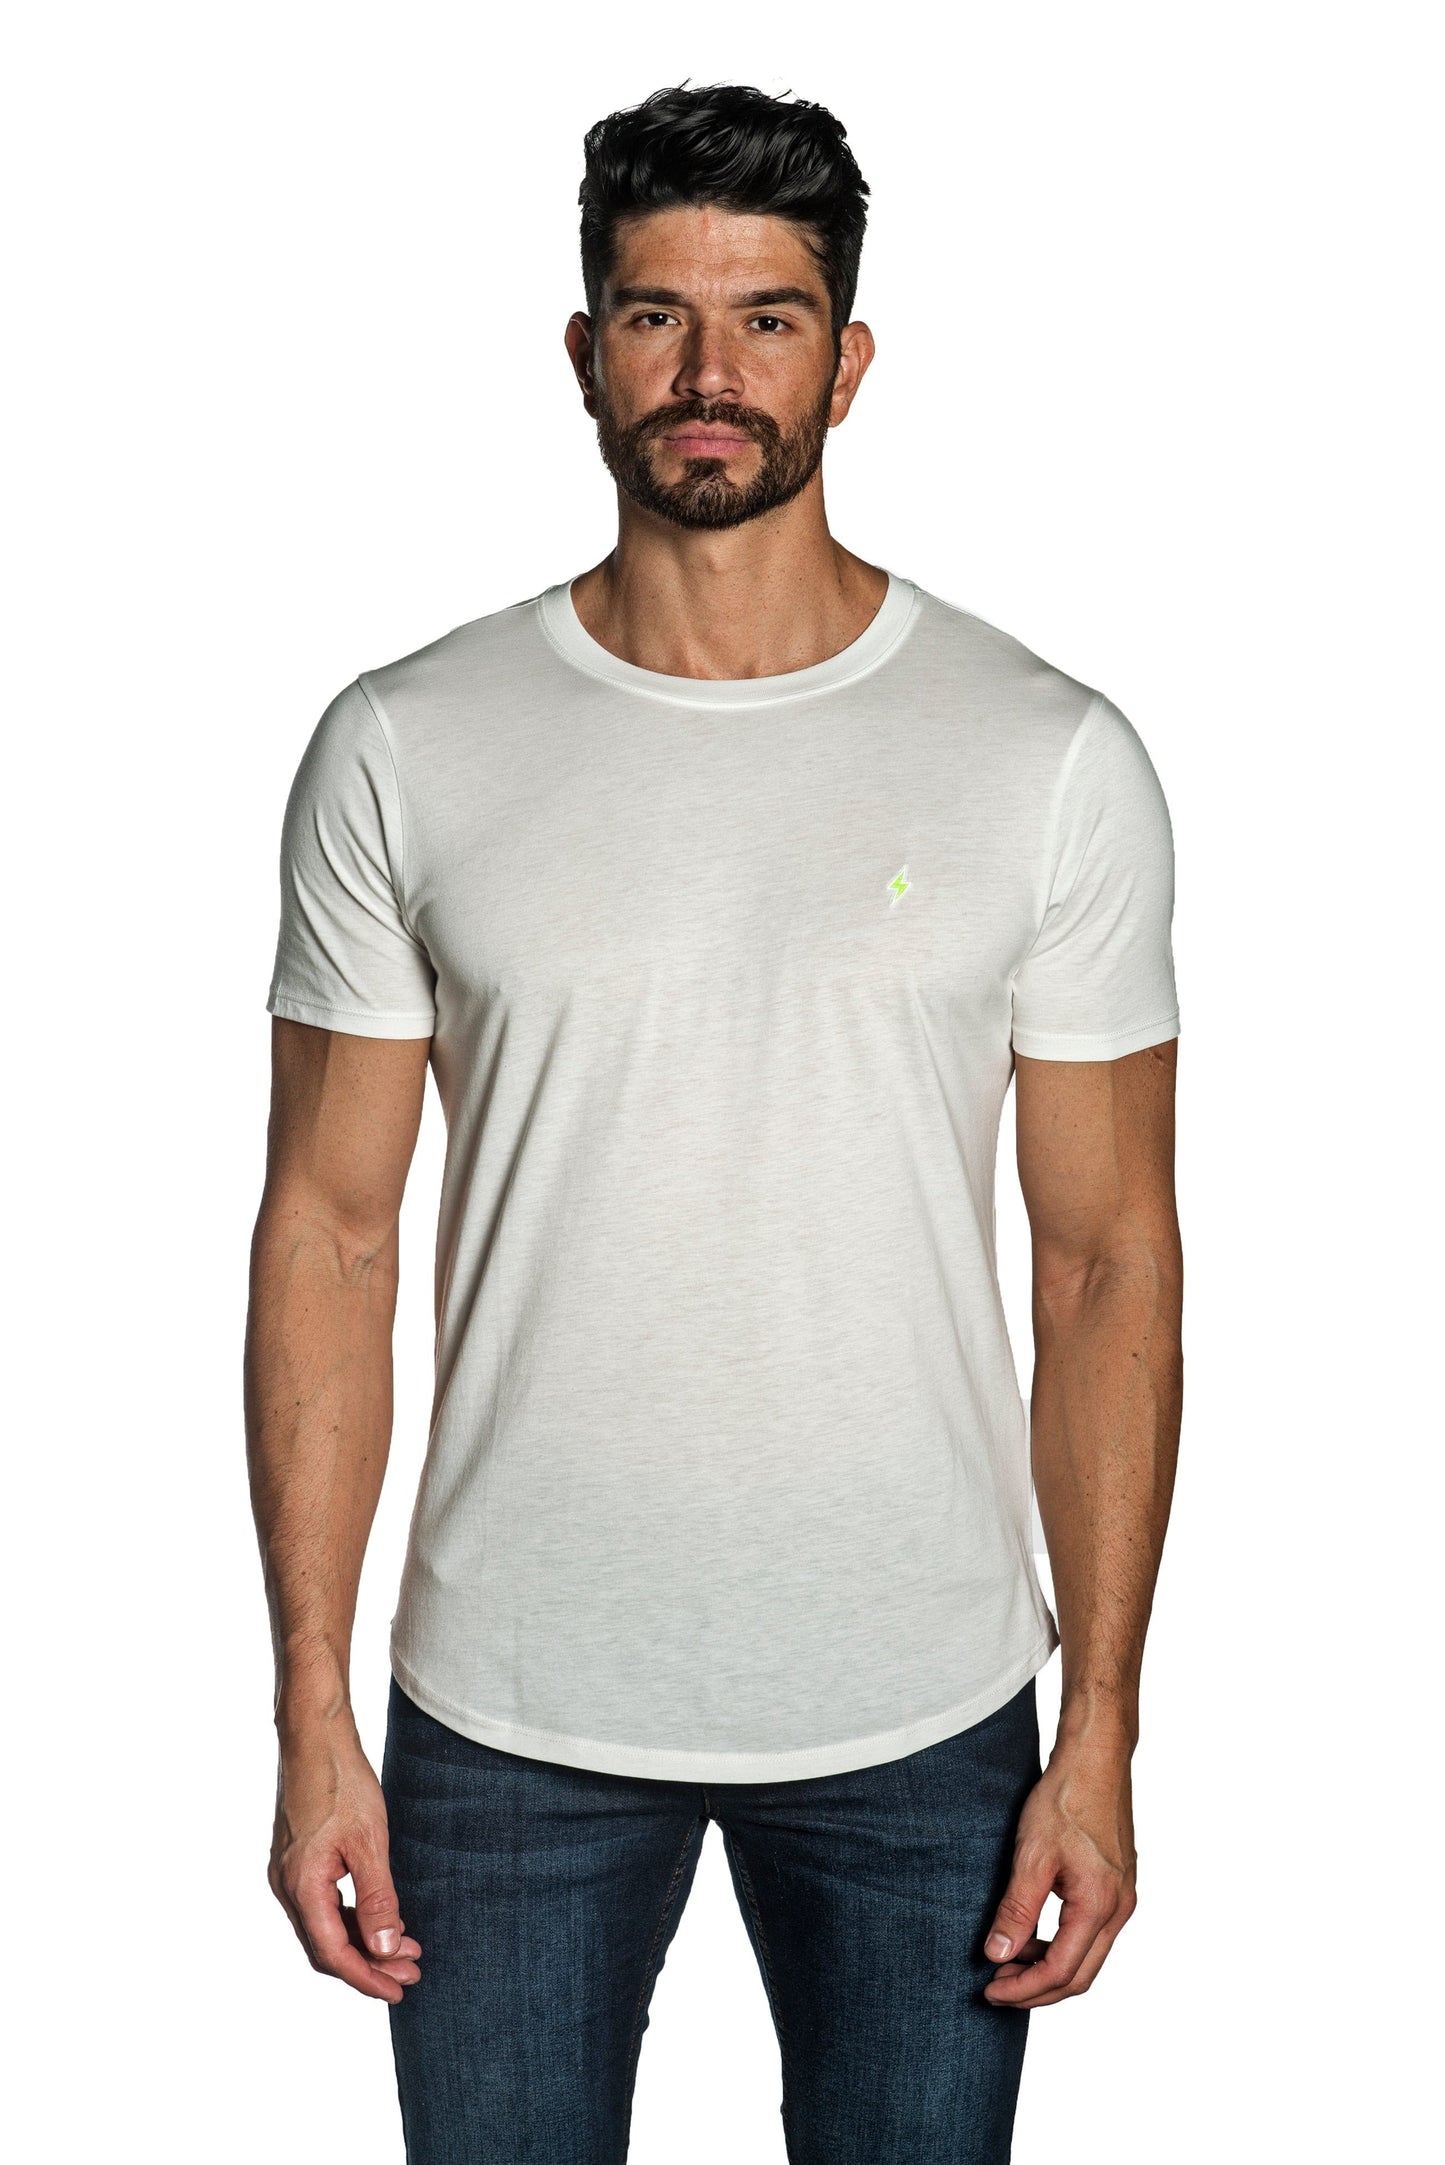 White Mens Tee With Lightning Embroidery TEE-37.